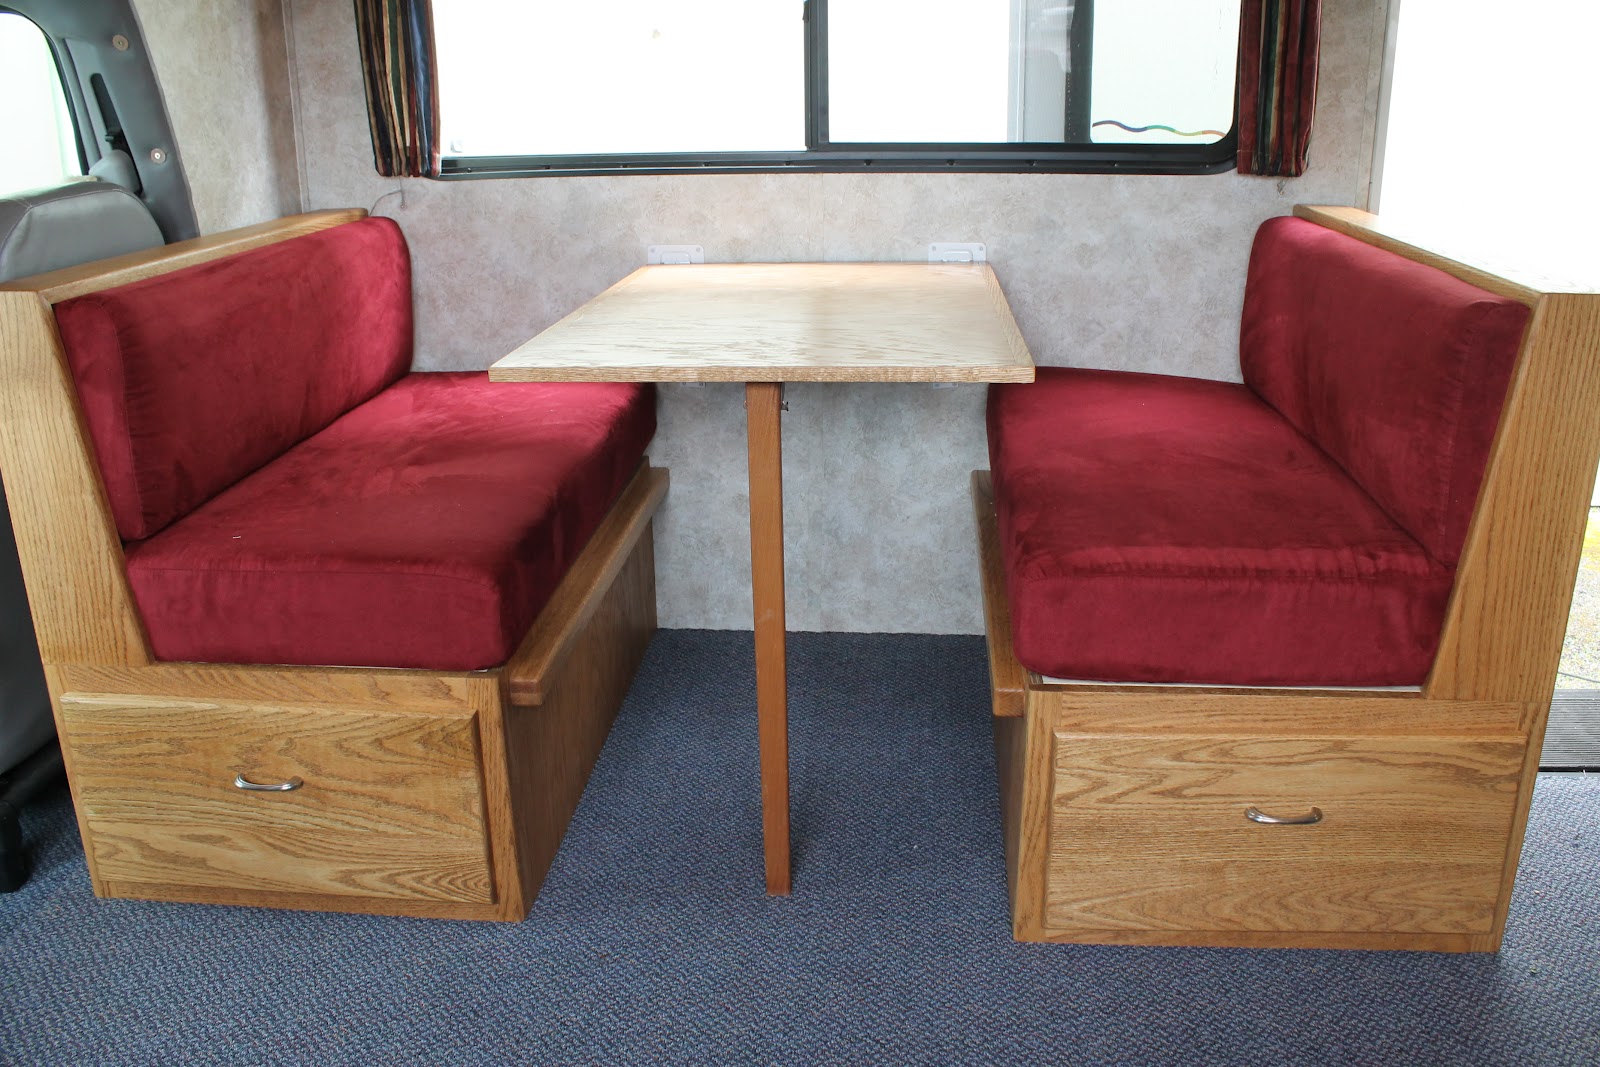 Countryside Interiors Transforming Rvs And Trailers Since The S